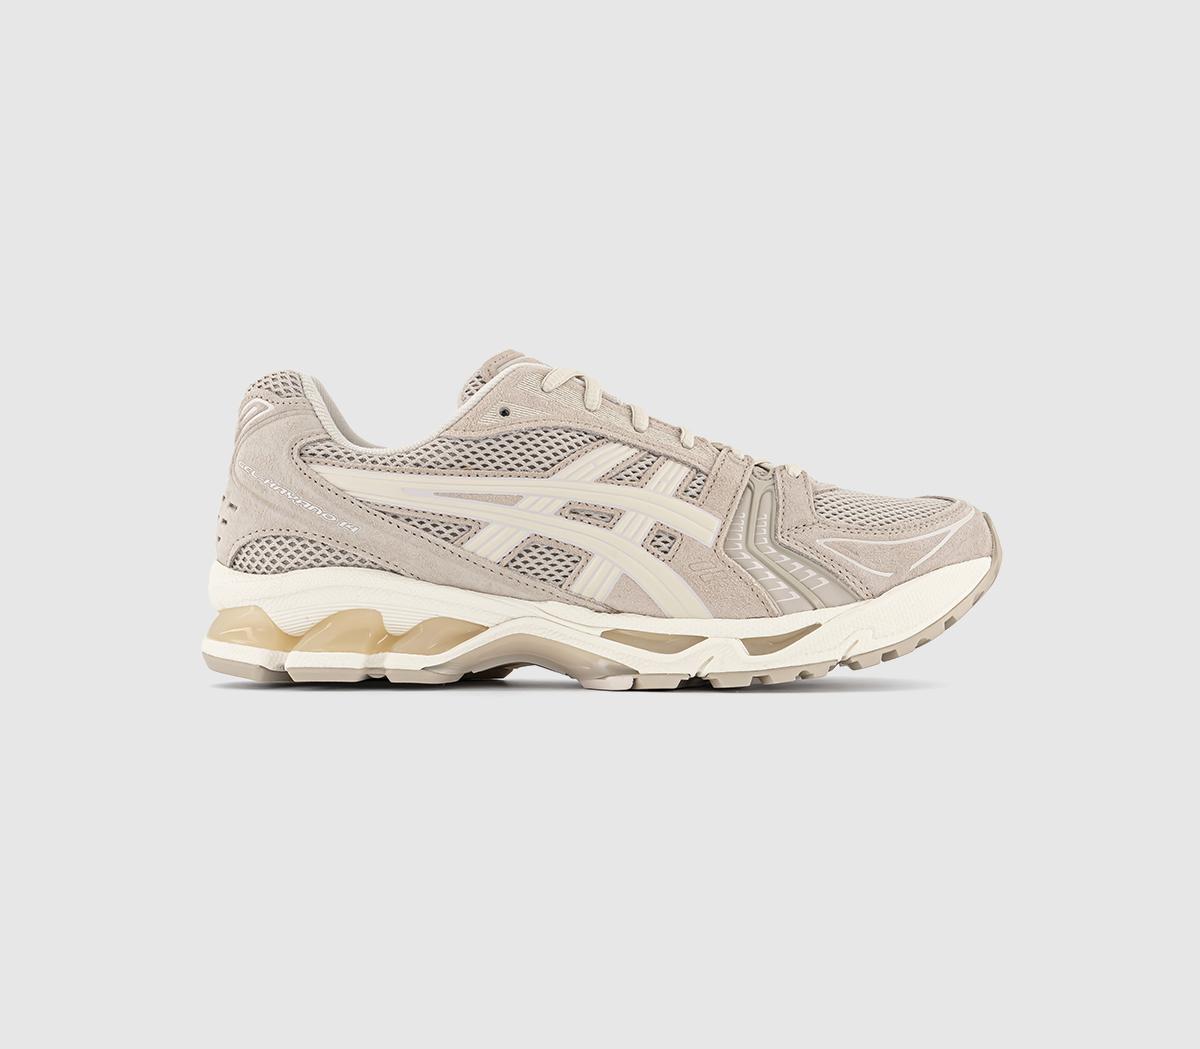 Gel-kayano 14 Trainers Simply Taupe Oatmeal Natural